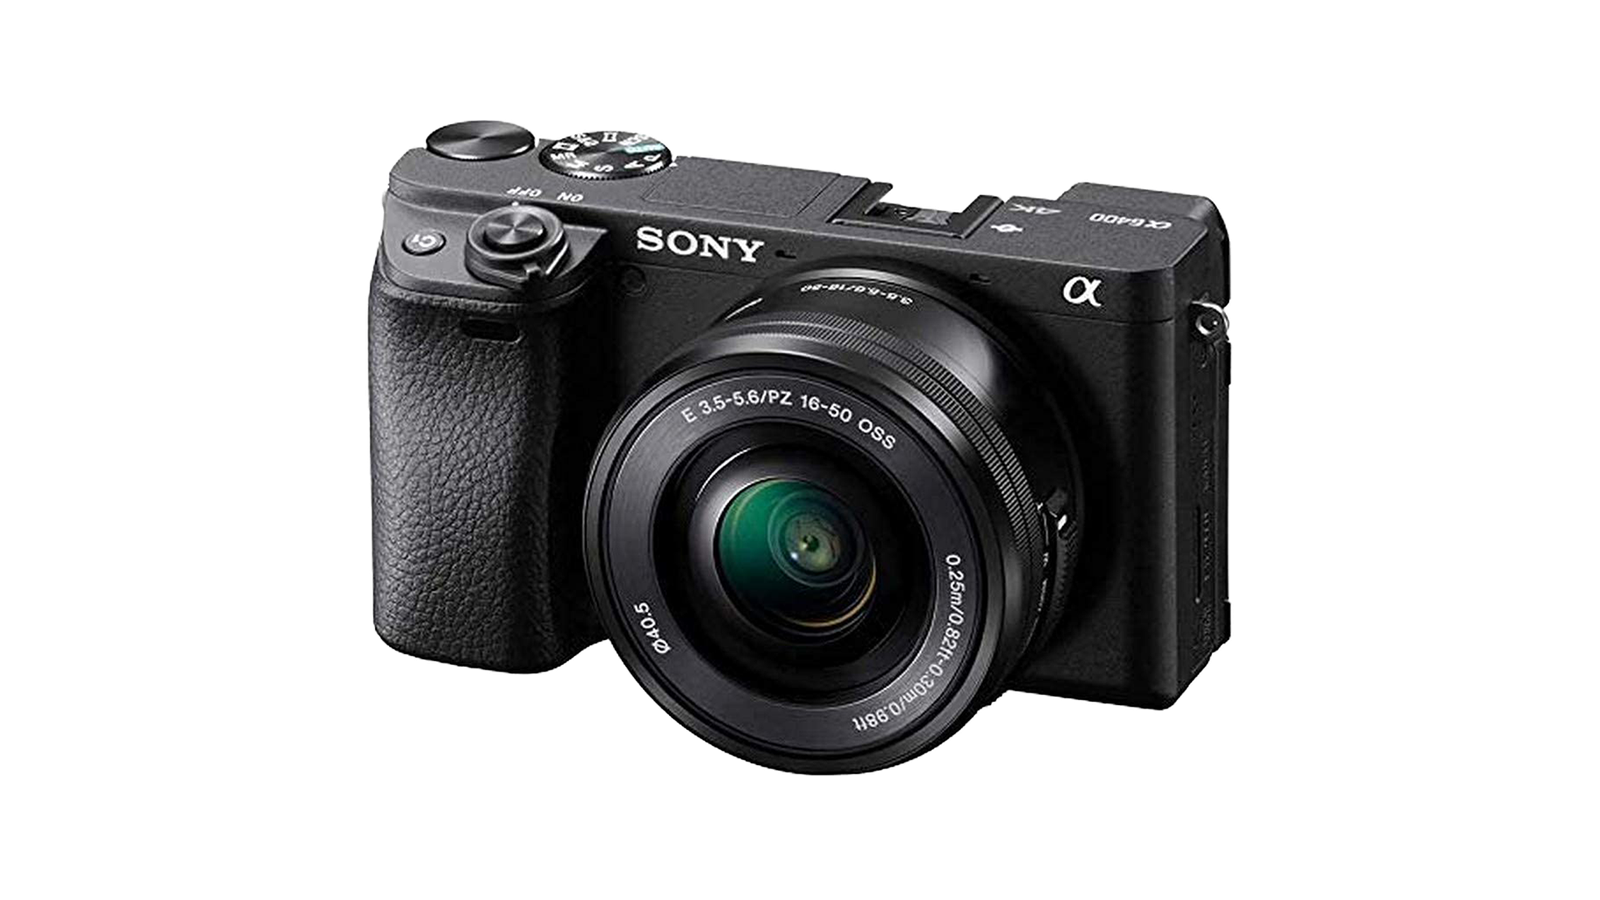 Sony A6400 - The best Sony camera for vlogging